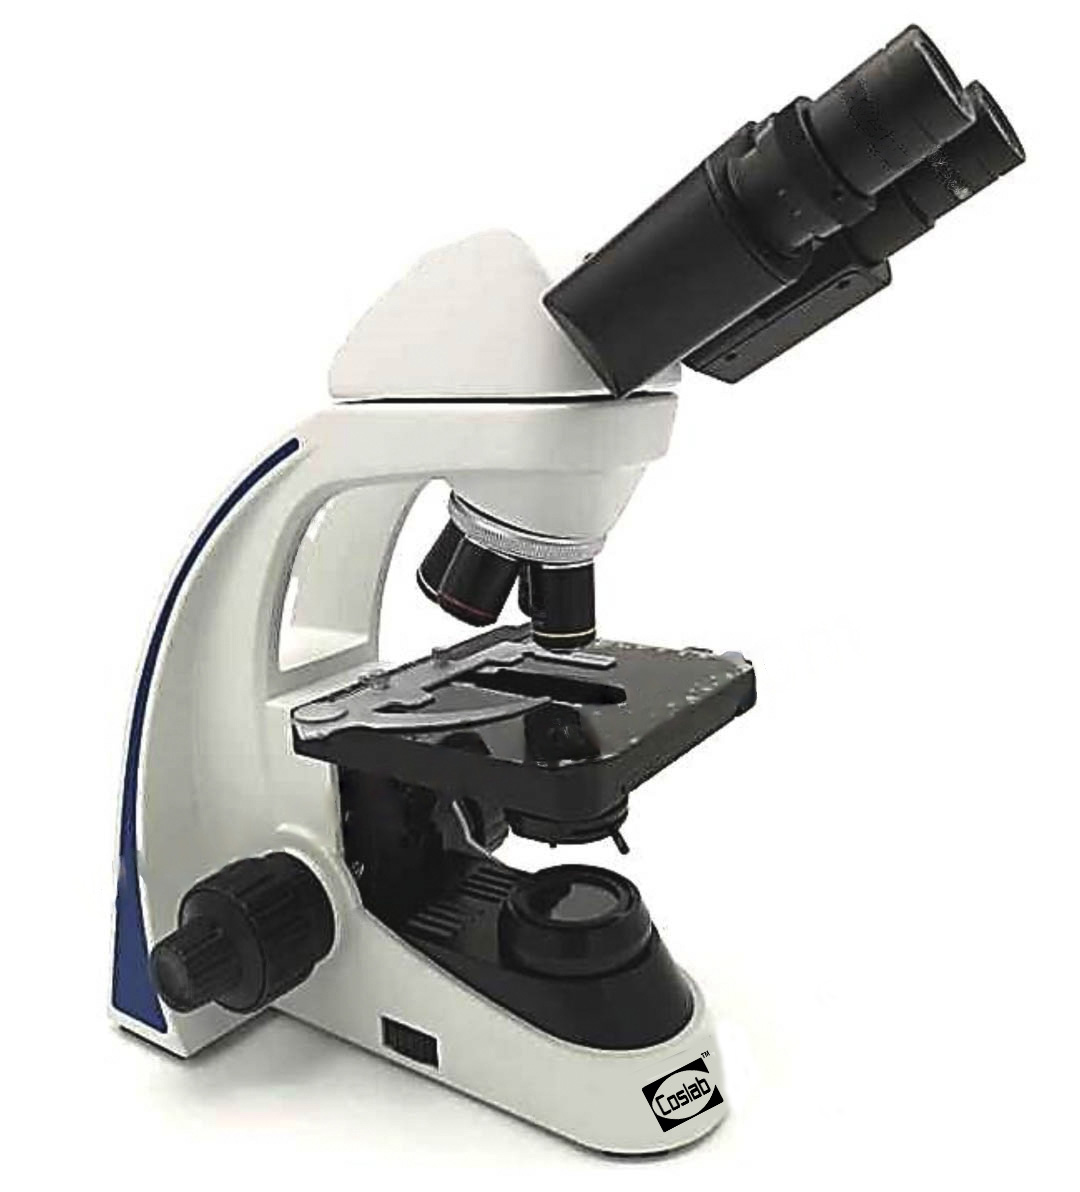 Microscope Suppliers, Microscope Manufacturers & Microscope Exporters